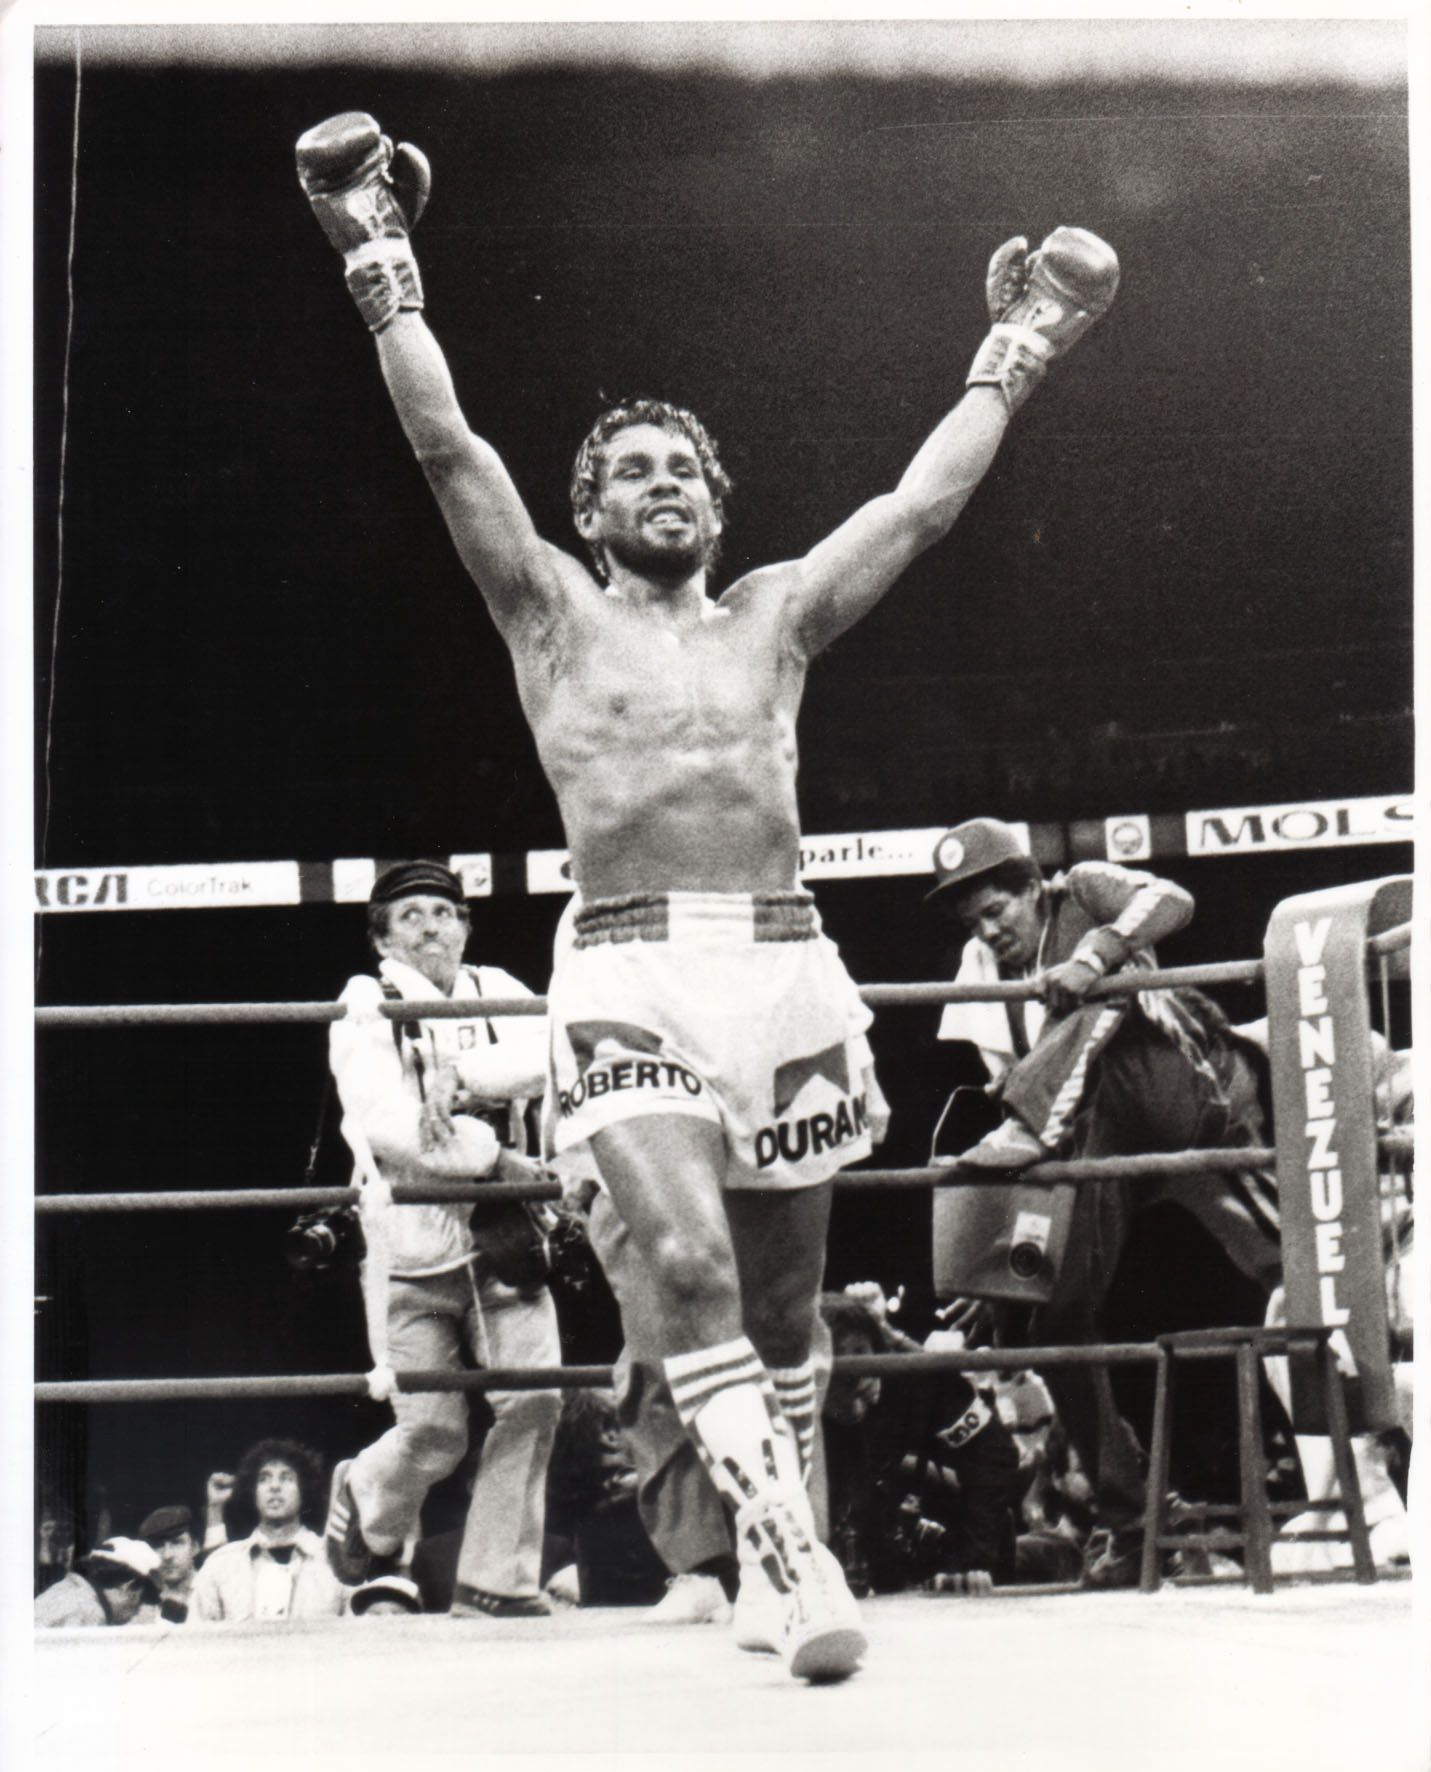 Roberto Duran celebrates another victory